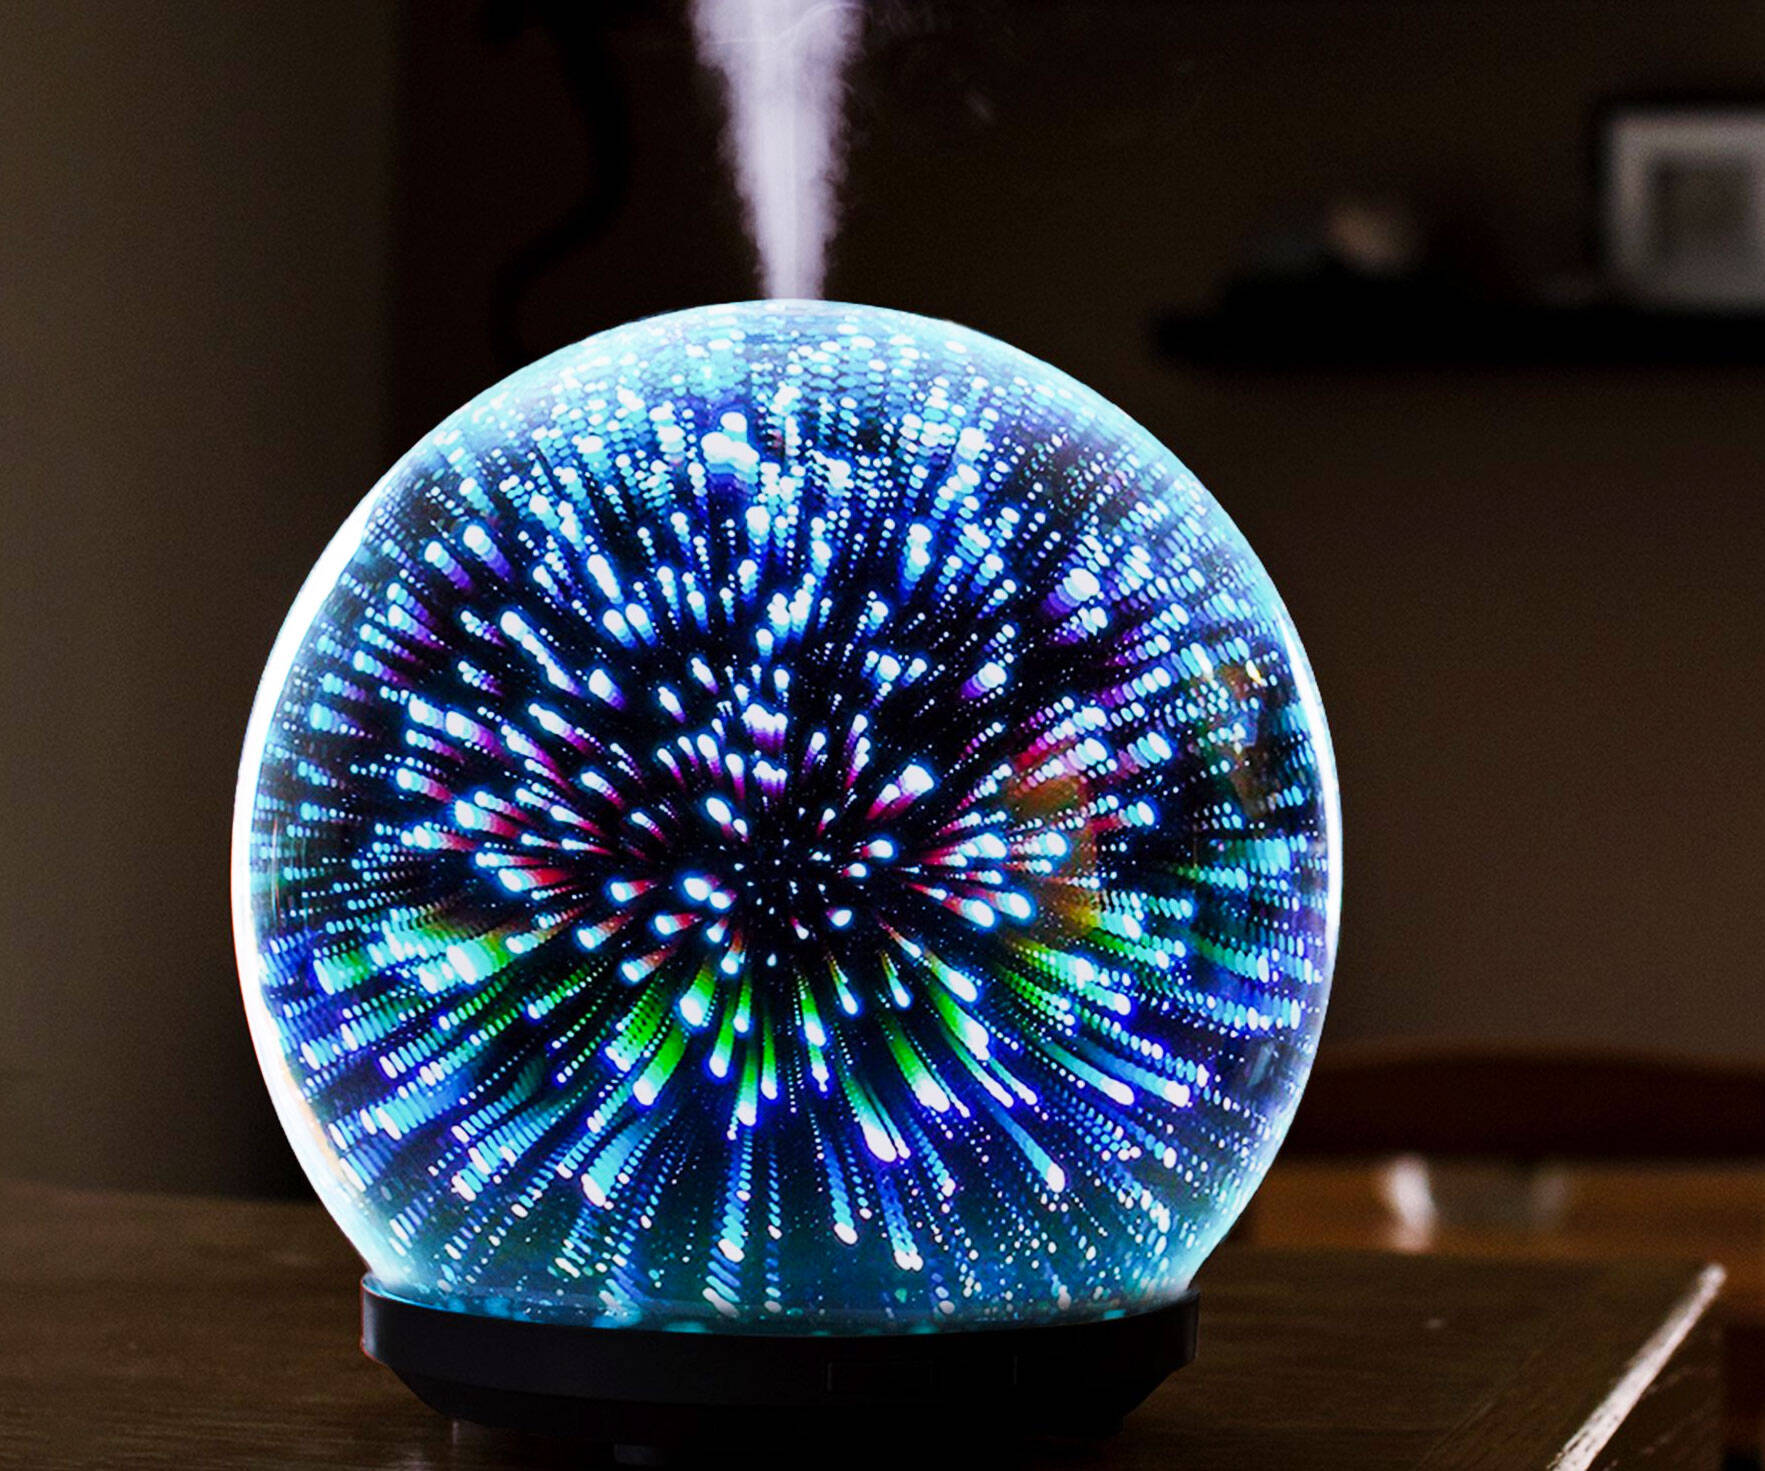 LED Ultrasonic Aromatherapy Humidifier - //coolthings.us